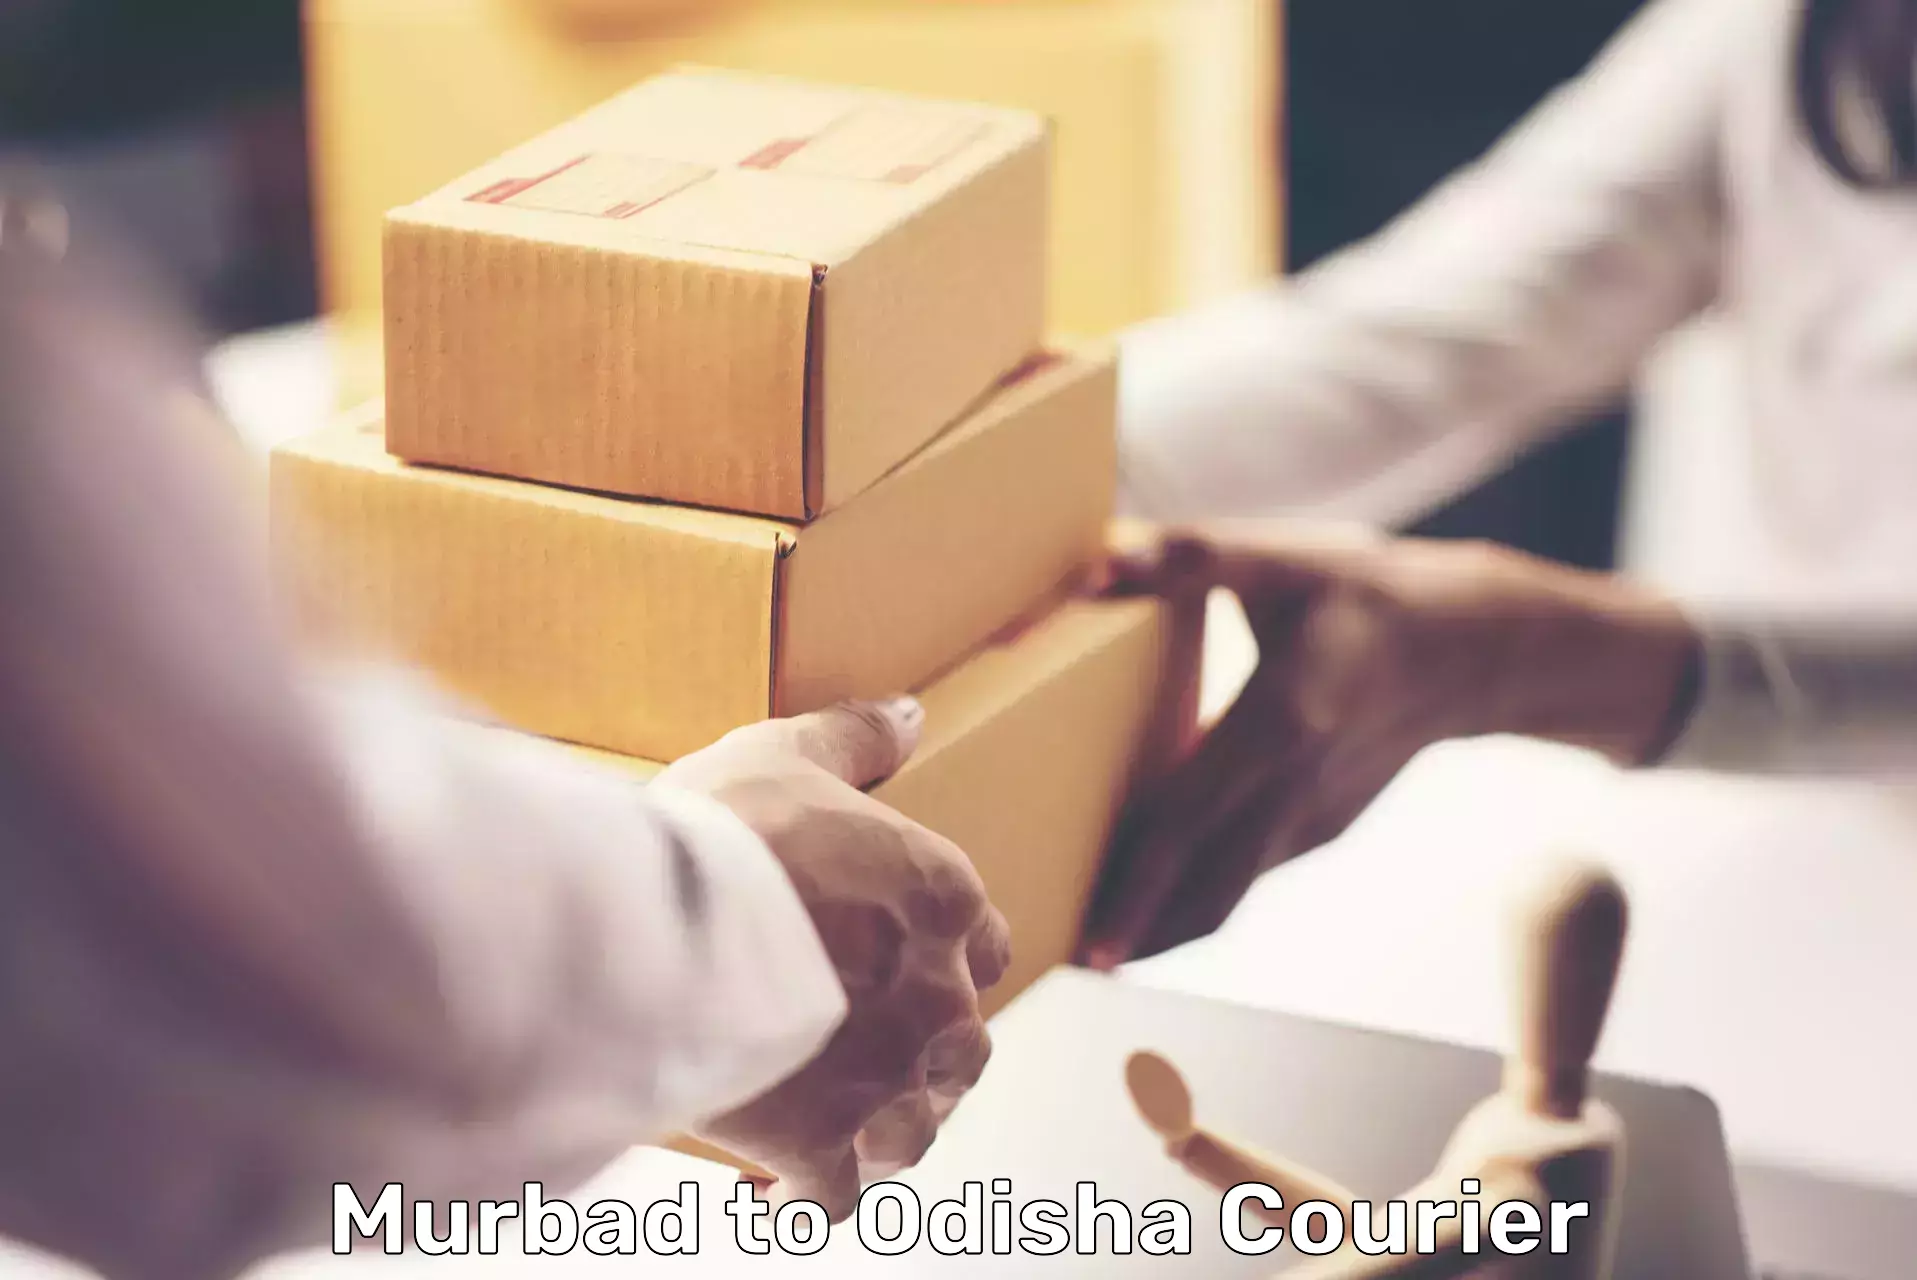 Courier service comparison Murbad to Kandhamal